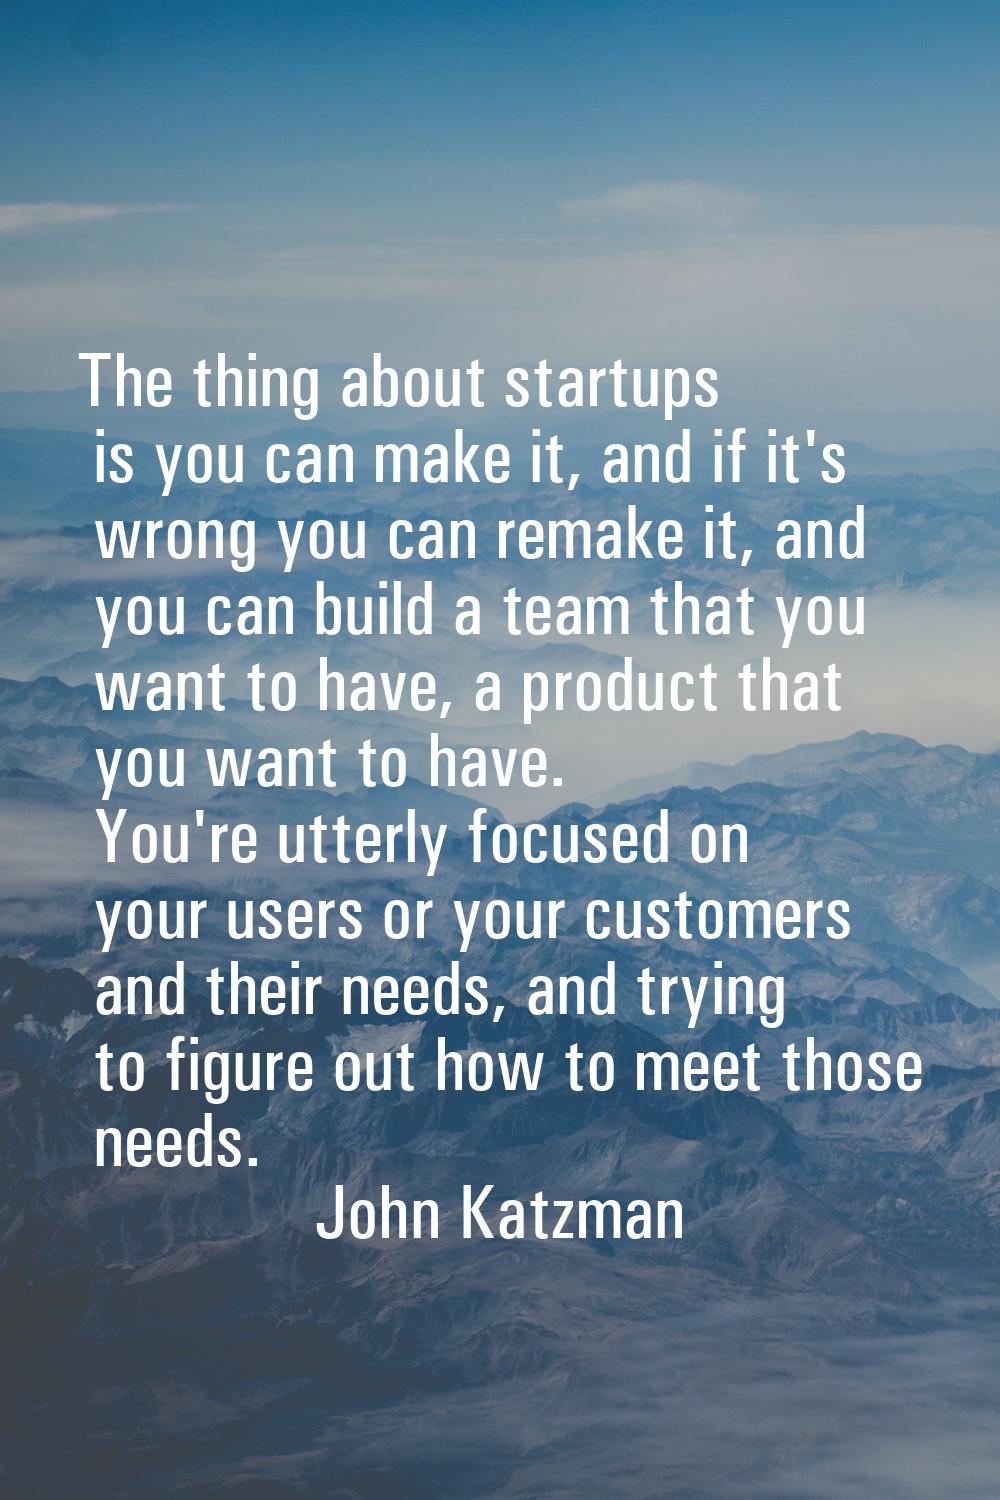 The thing about startups is you can make it, and if it's wrong you can remake it, and you can build